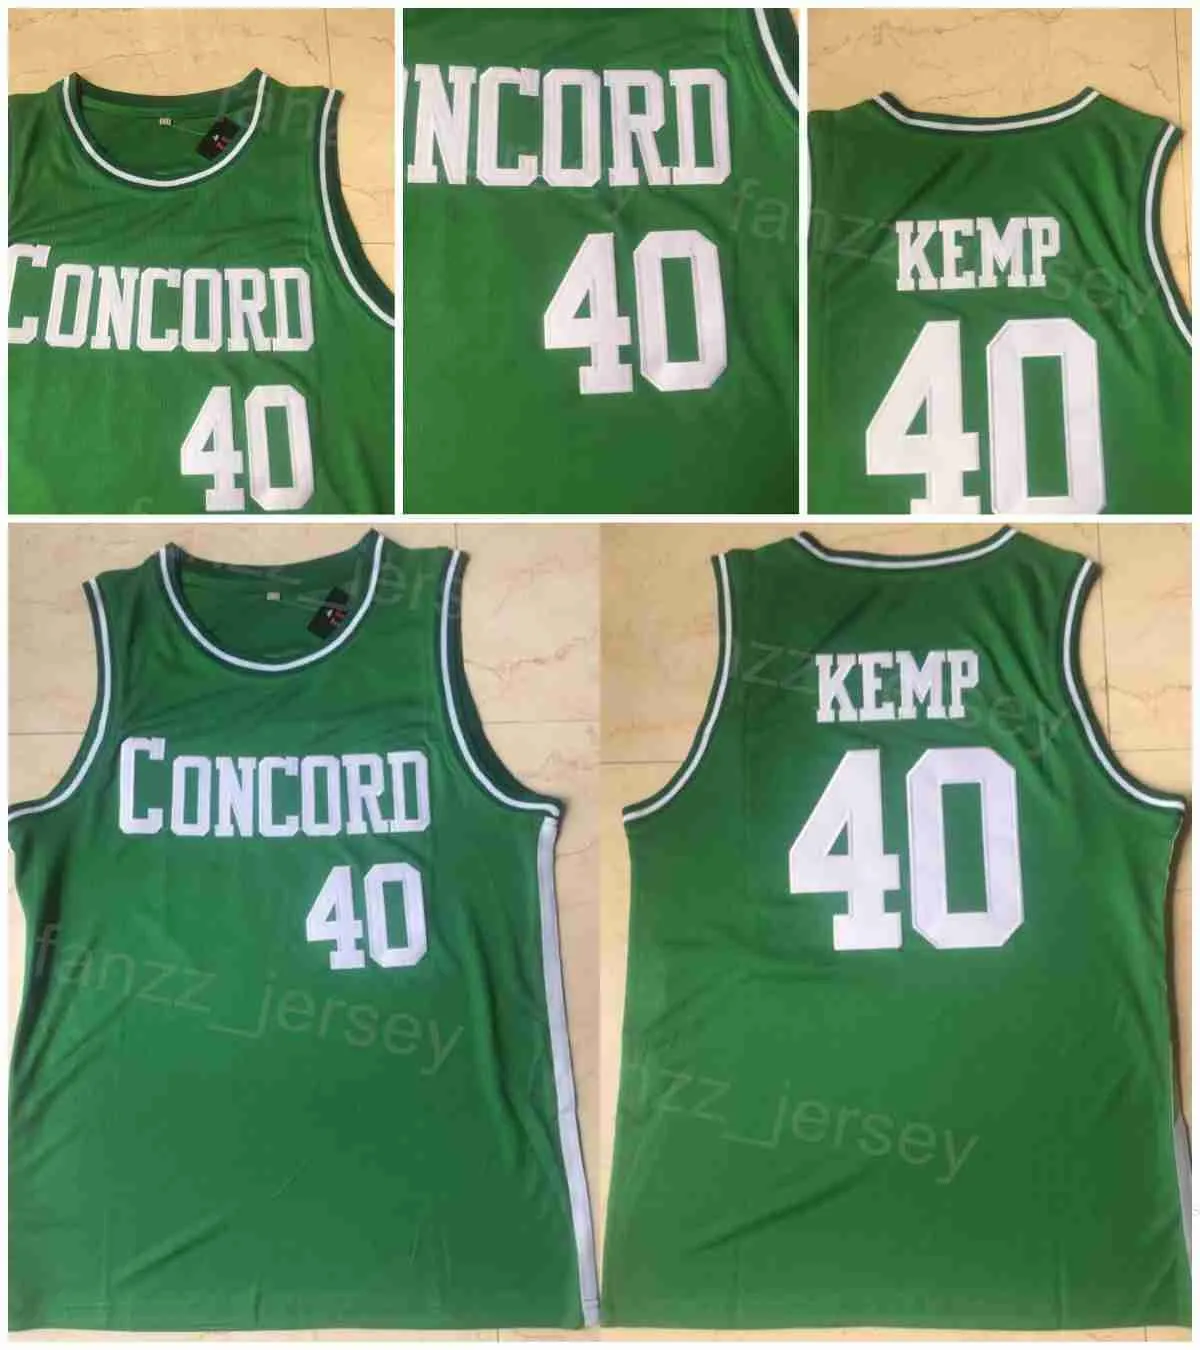 Concord Academy High School 40 Shawn Kemp Jersey Basketball College University Shirt All Stitched Team Color Green For Sport Fans Breattable Pure Cotton Man NCAA